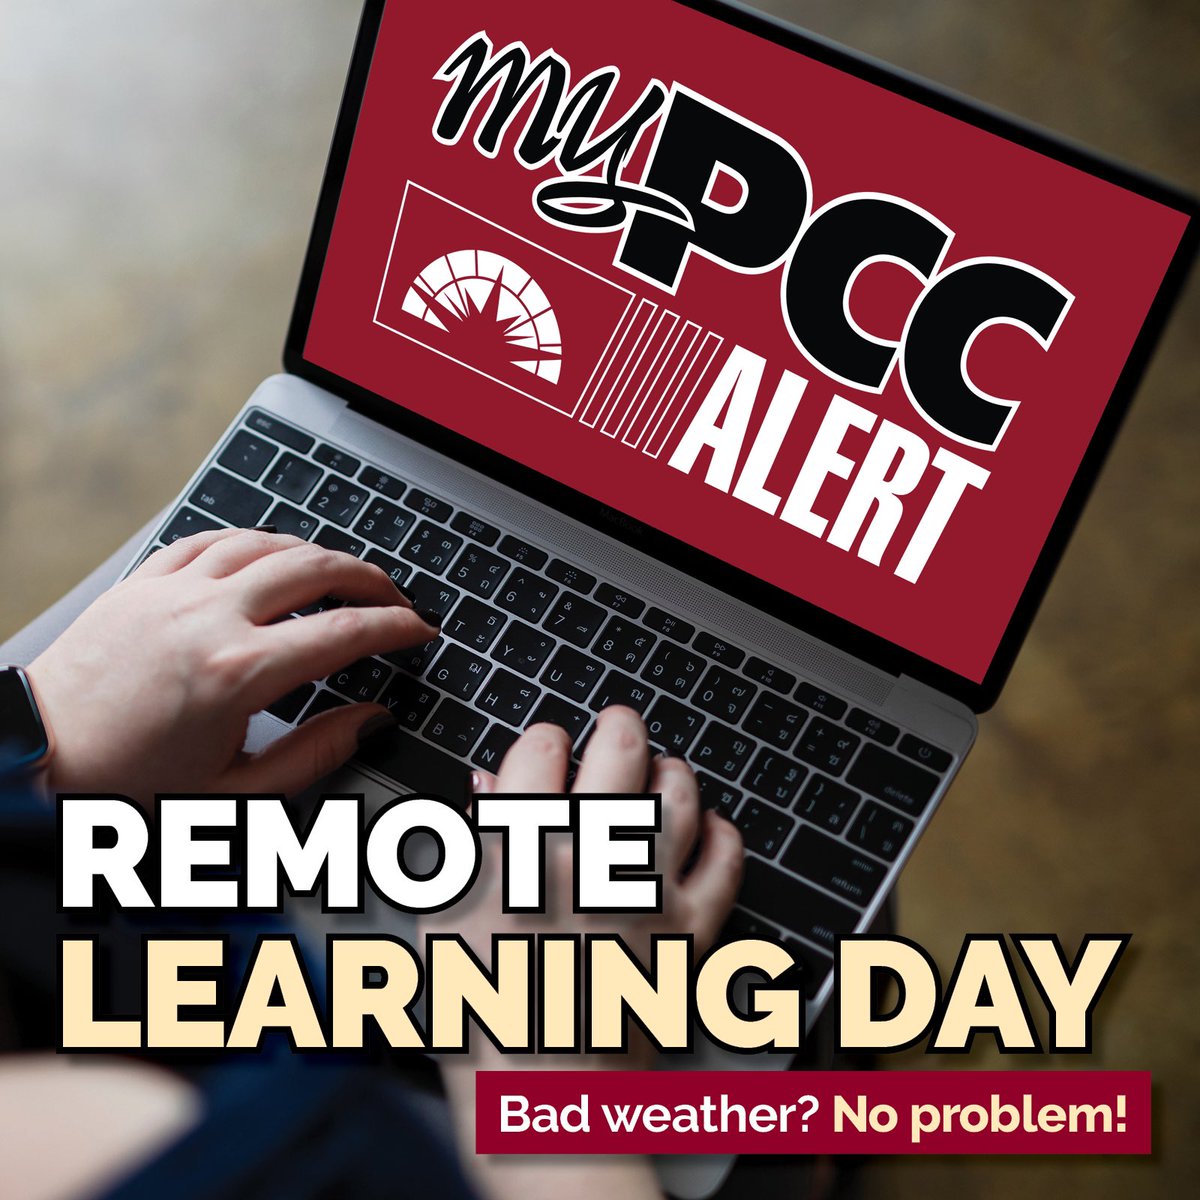 PCC SOUTHWEST: Due to weather, all Southwest campuses & sites will be on remote status Friday, March 15. Students, check MyCourses for specific class instructions. All nonessential employees will work remotely. Info: pueblocc.edu/weather. #MyPCCAlert